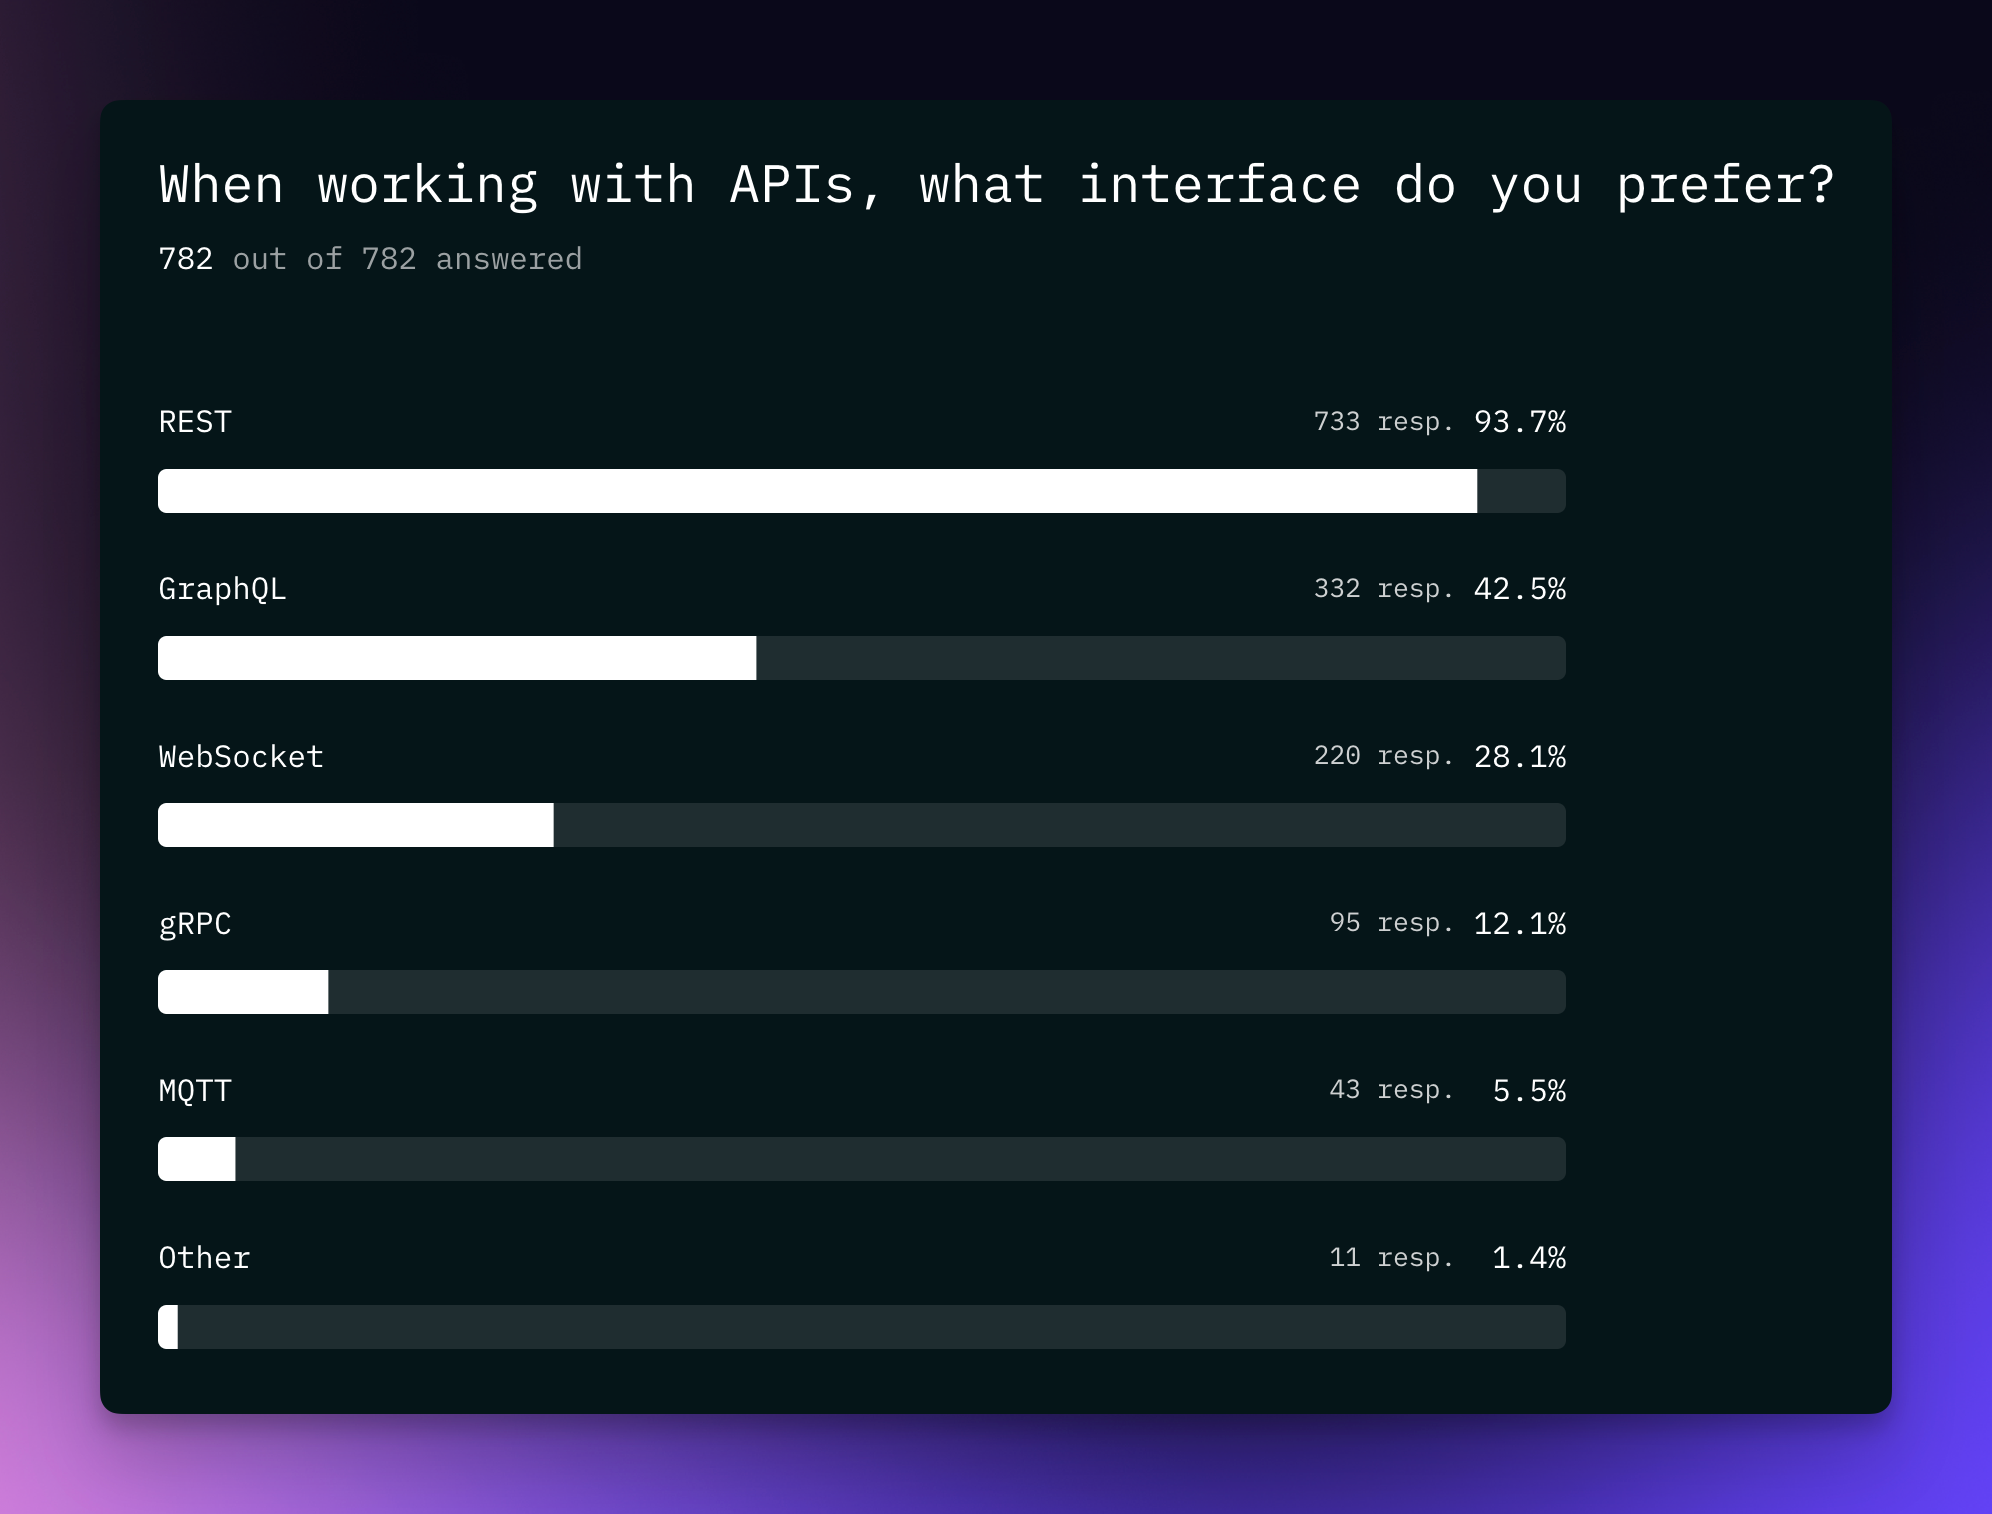 When working with APIs, what interface do you prefer